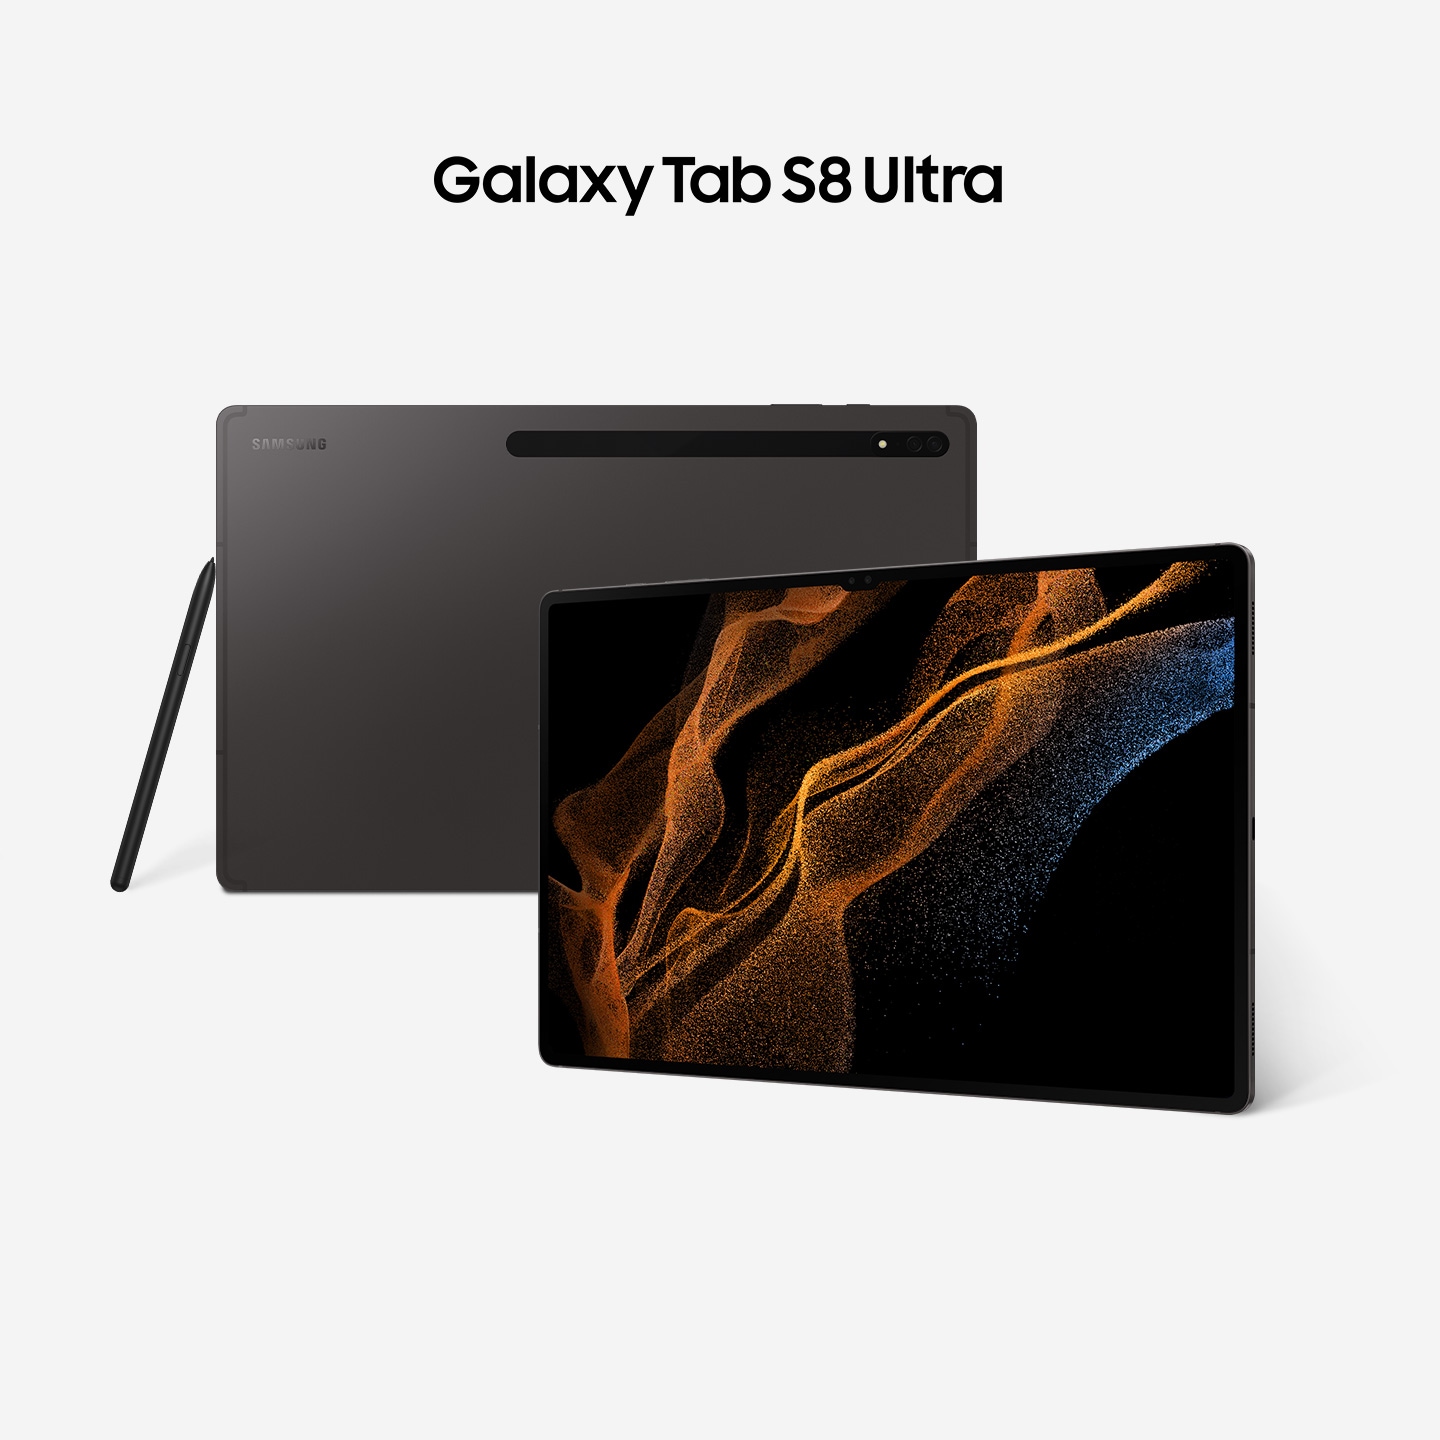 Buy Now the new Galaxy Tab S8, S8+, S8 Ultra, Price & Deals